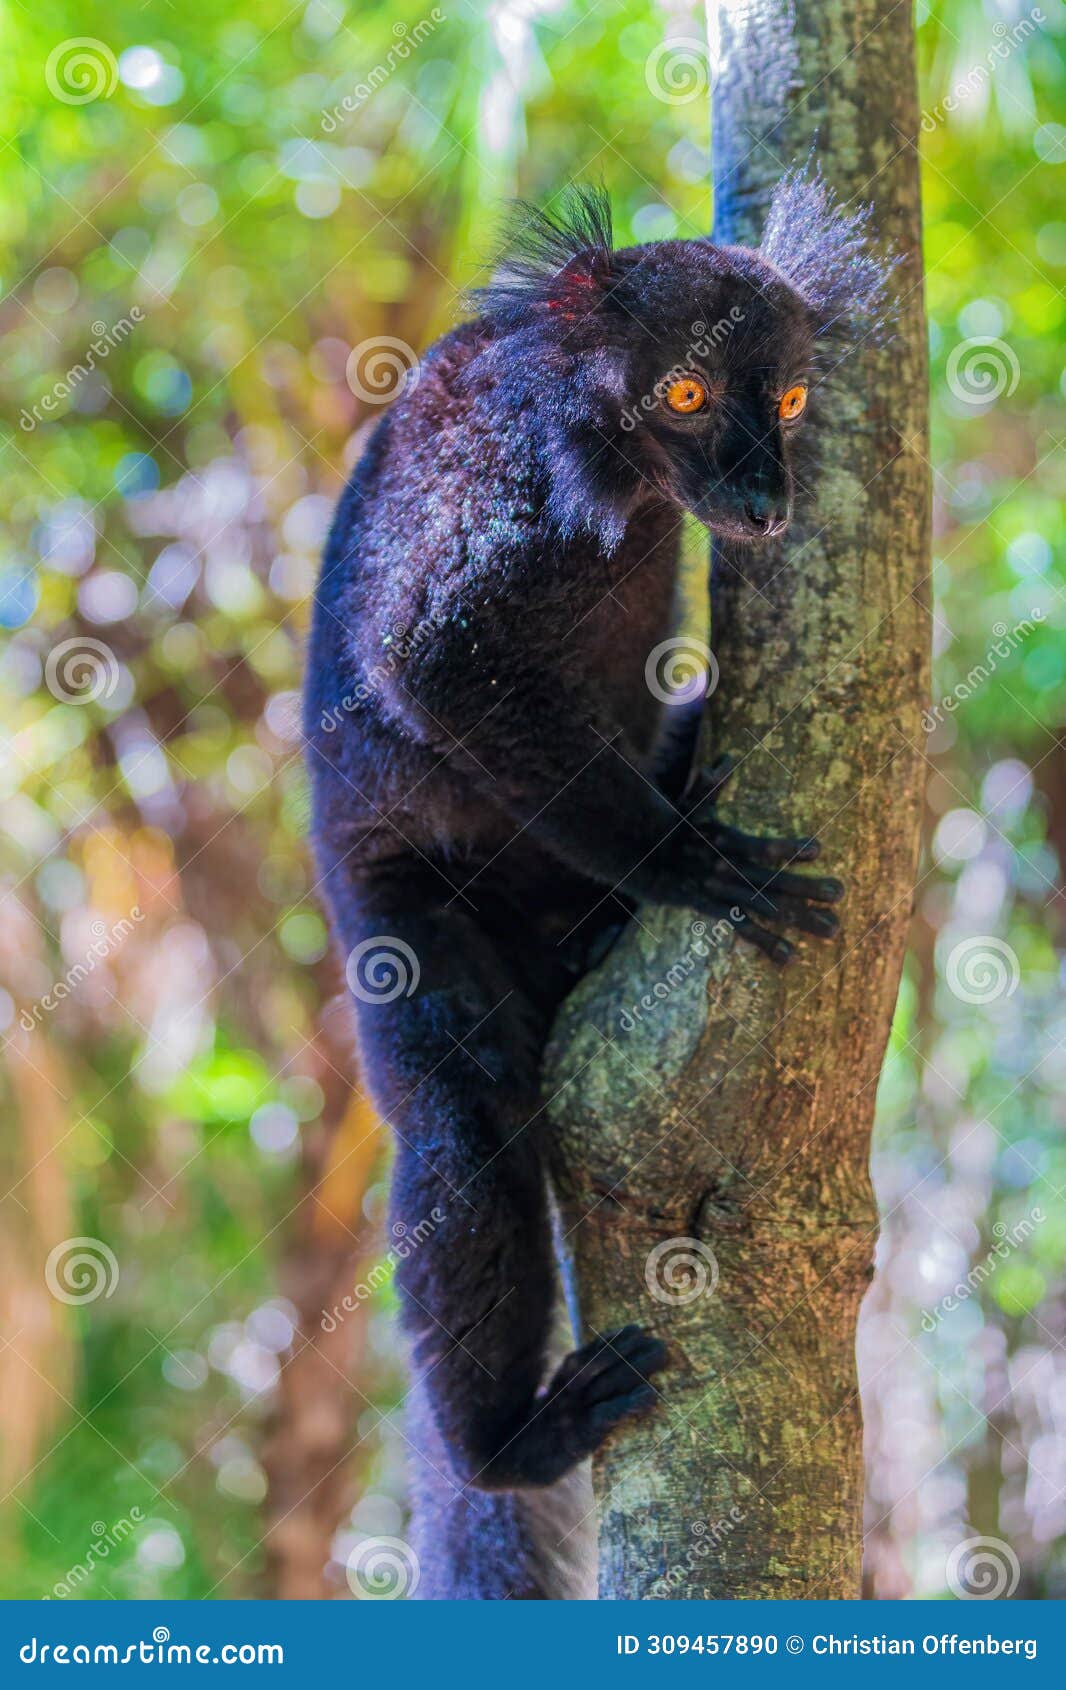 very cute black eulemur macaco is sitting on a tree, holding onto the trunk with its paws.